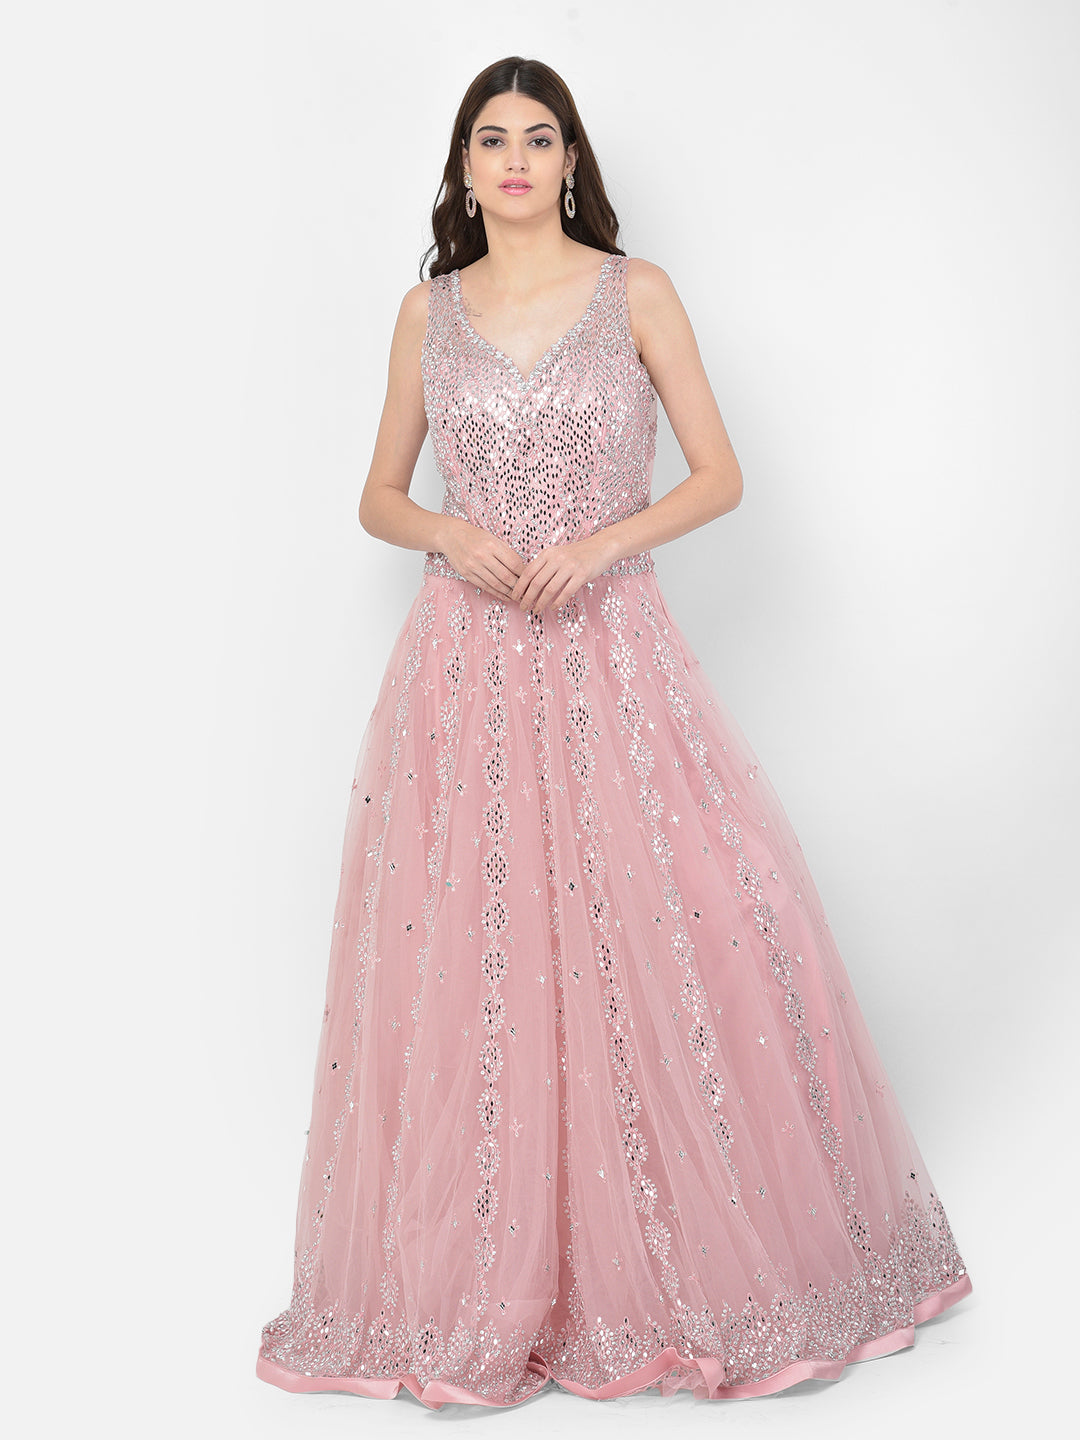 Pink Rosedale Gown | Prom dresses lace, Gowns, Pink prom dresses